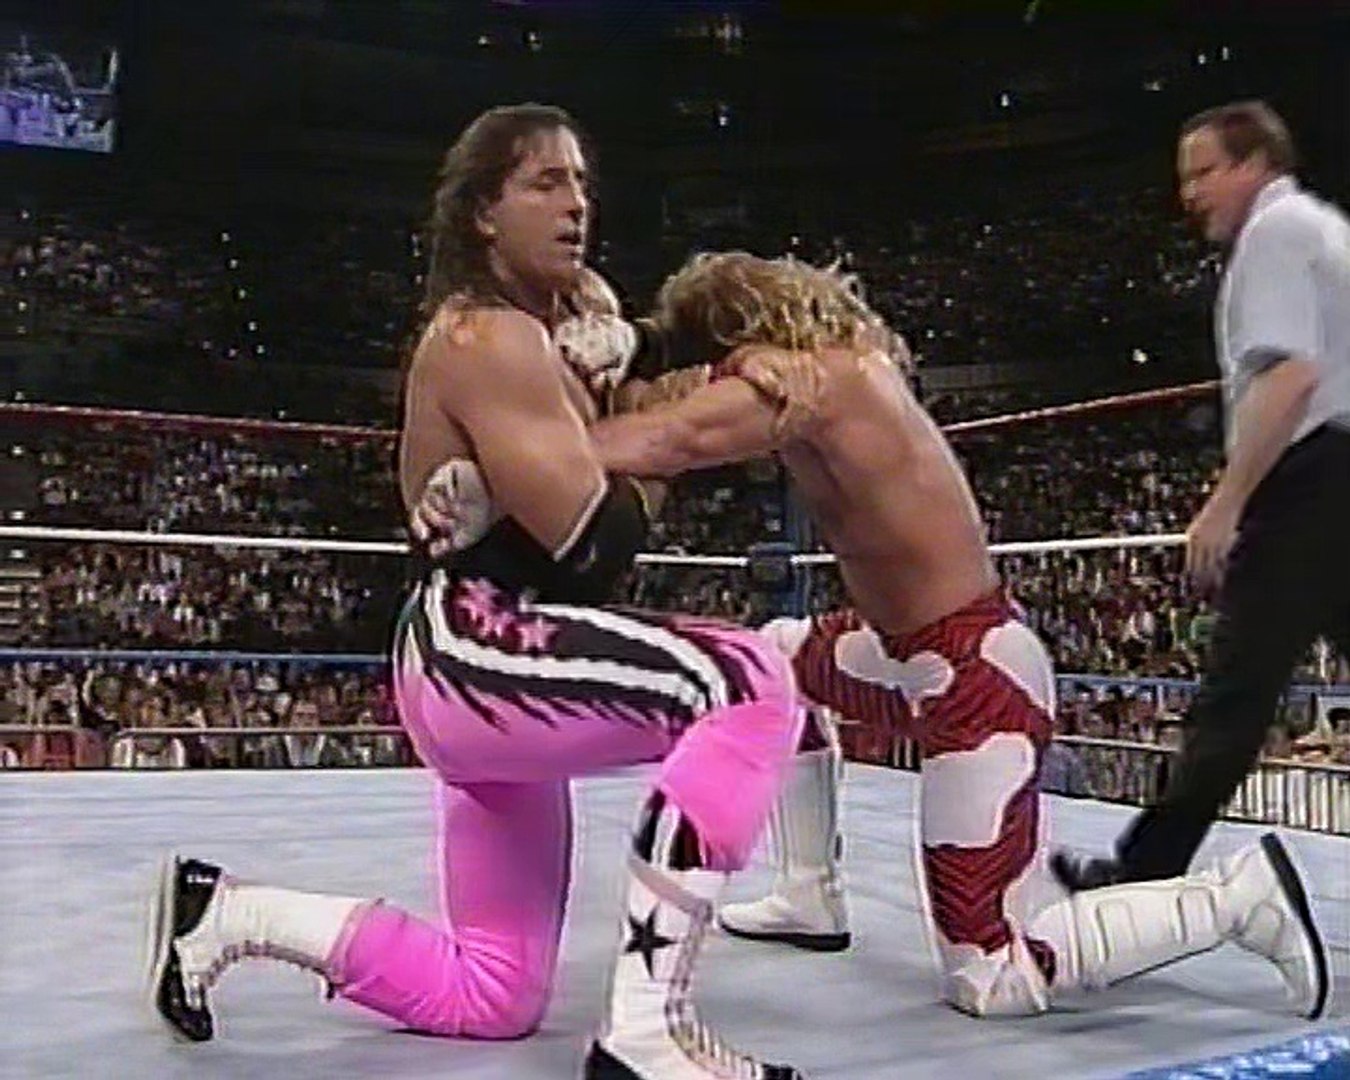 Bret Hart vs. Shawn Michaels in a Ladder Match for the